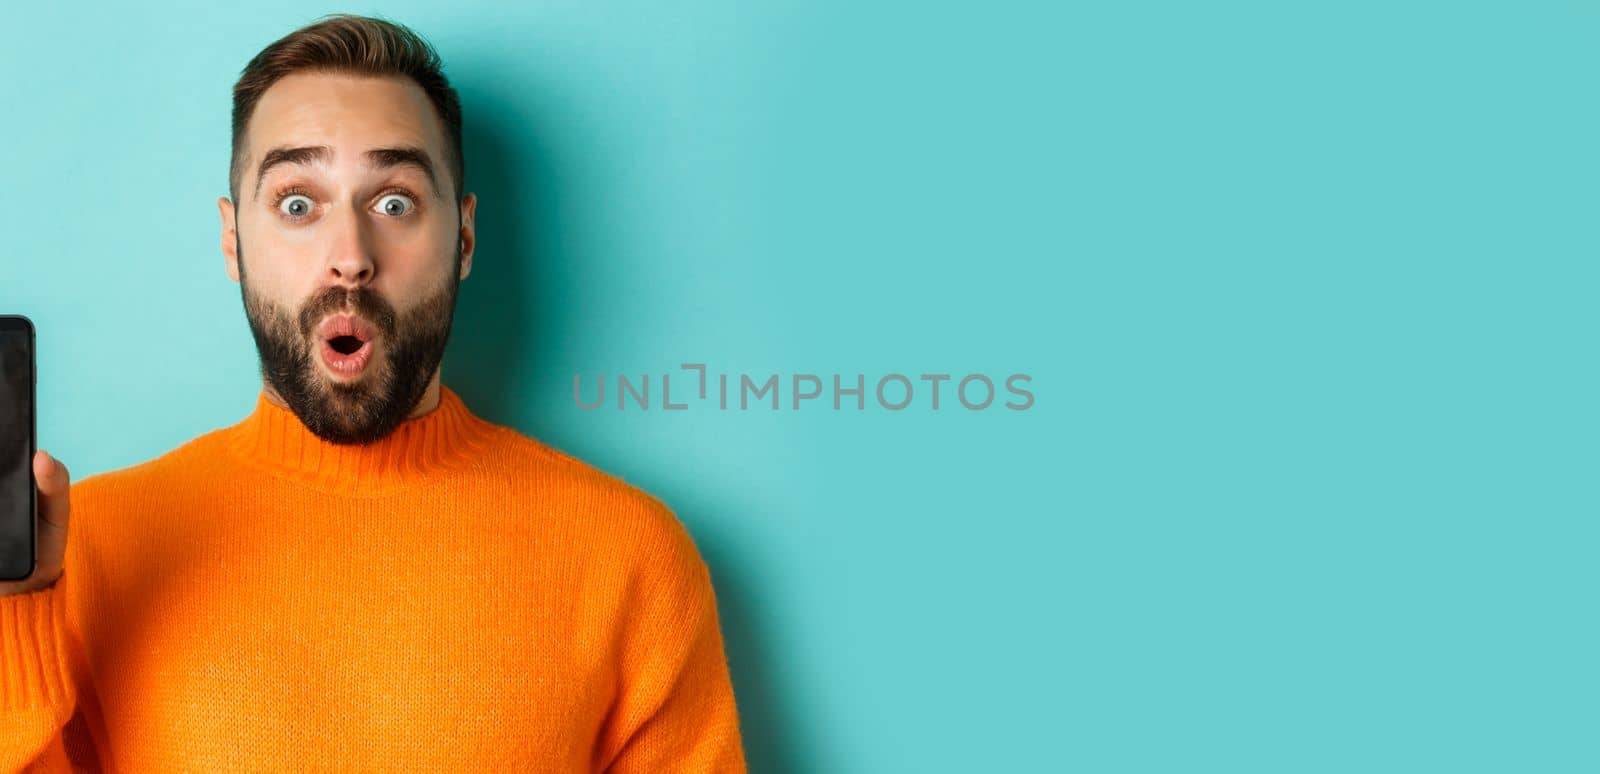 Close-up of handsome bearded guy in orange sweater, showing smartphone screen and smiling, showing promo online, turquoise background by Benzoix